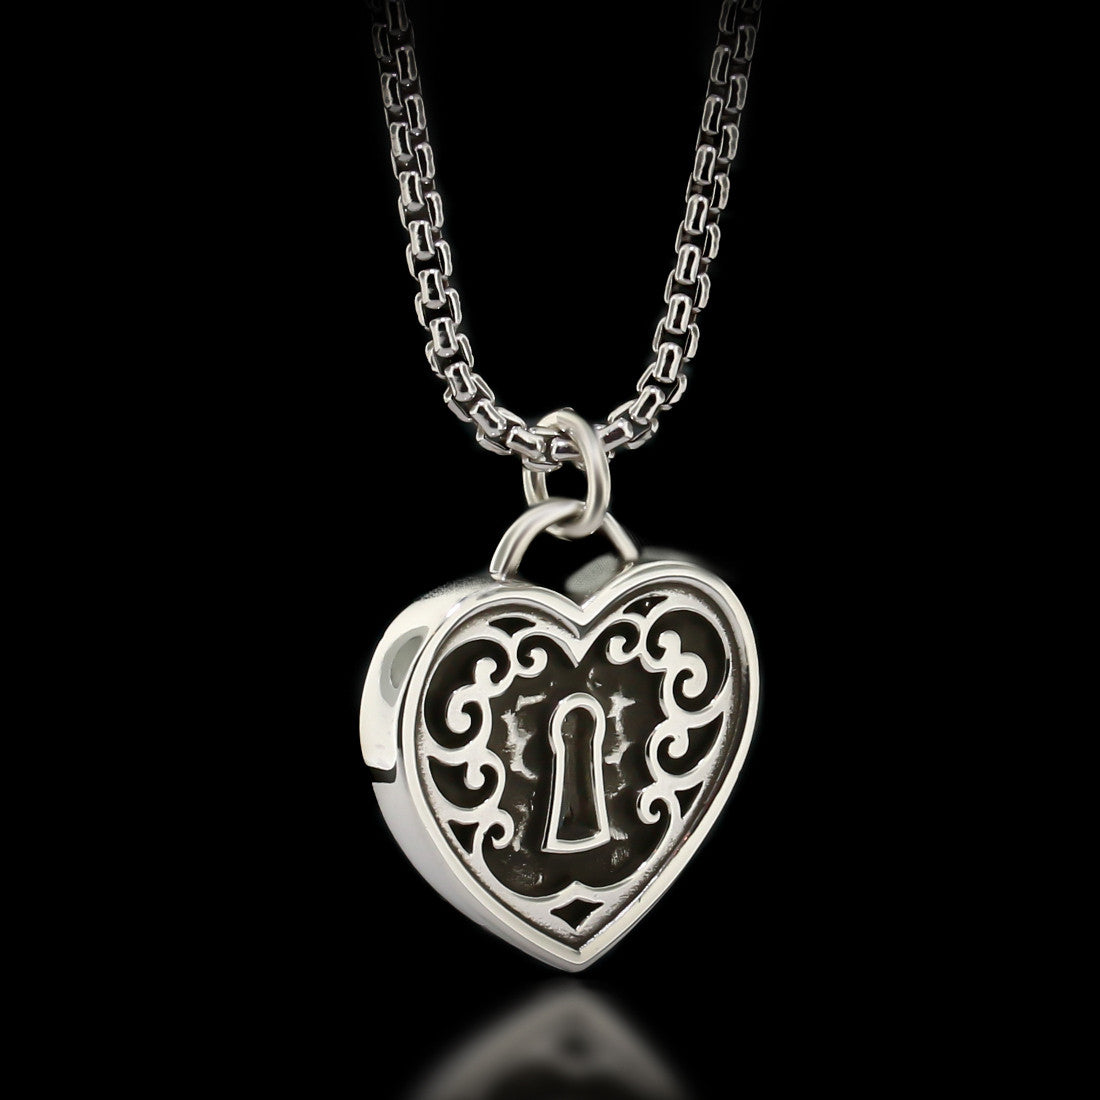 Padlock Heart Necklace - Sterling Silver - Twisted Love NYC